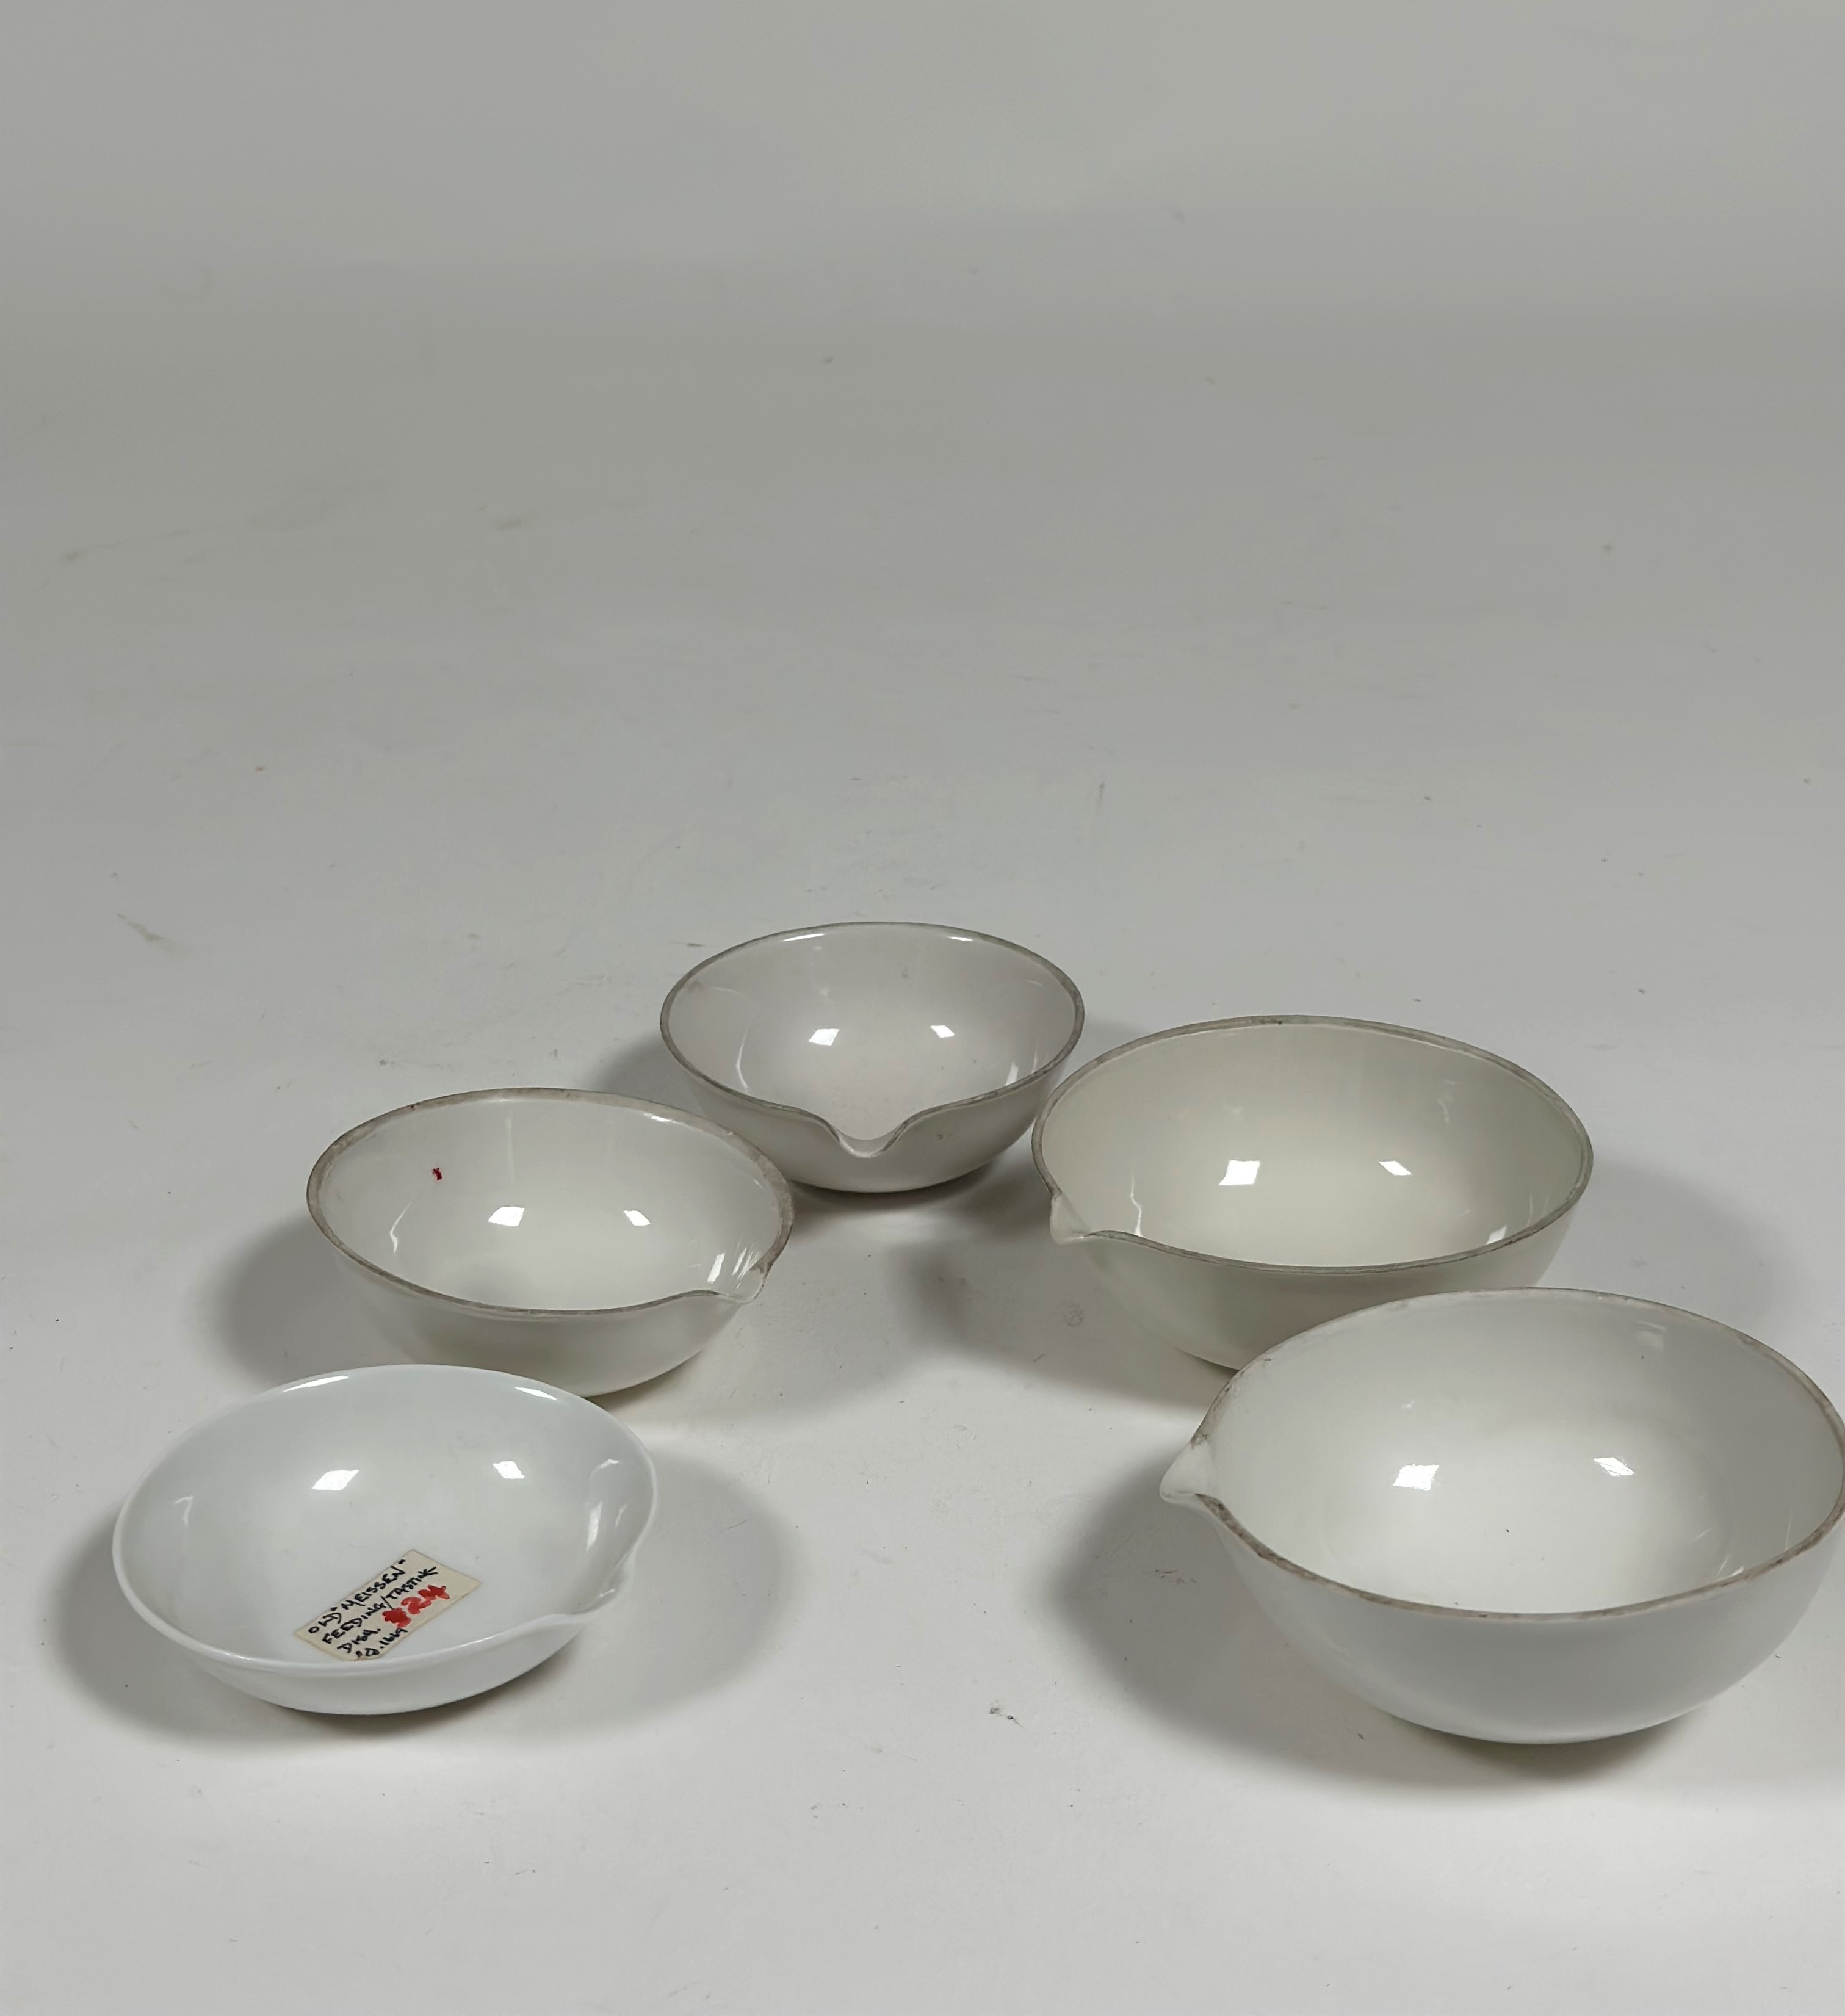 A group of 19th century and later small porcelain apothecary or feeding dishes, each shallow